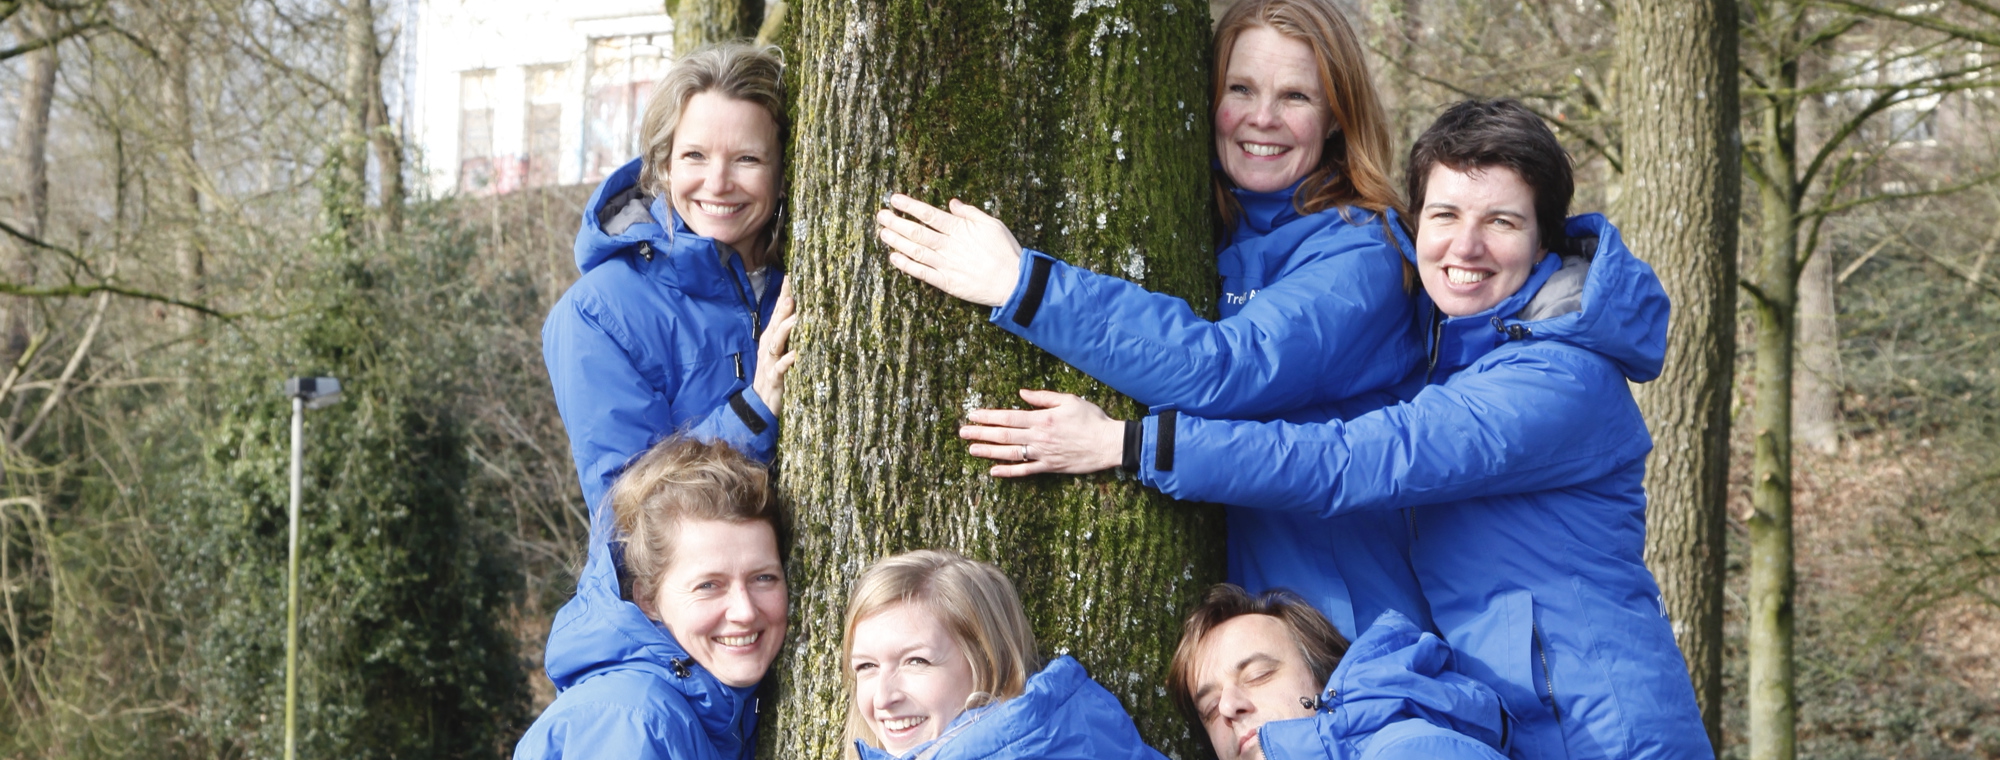 Team Trees For All Treehug Actie (1)